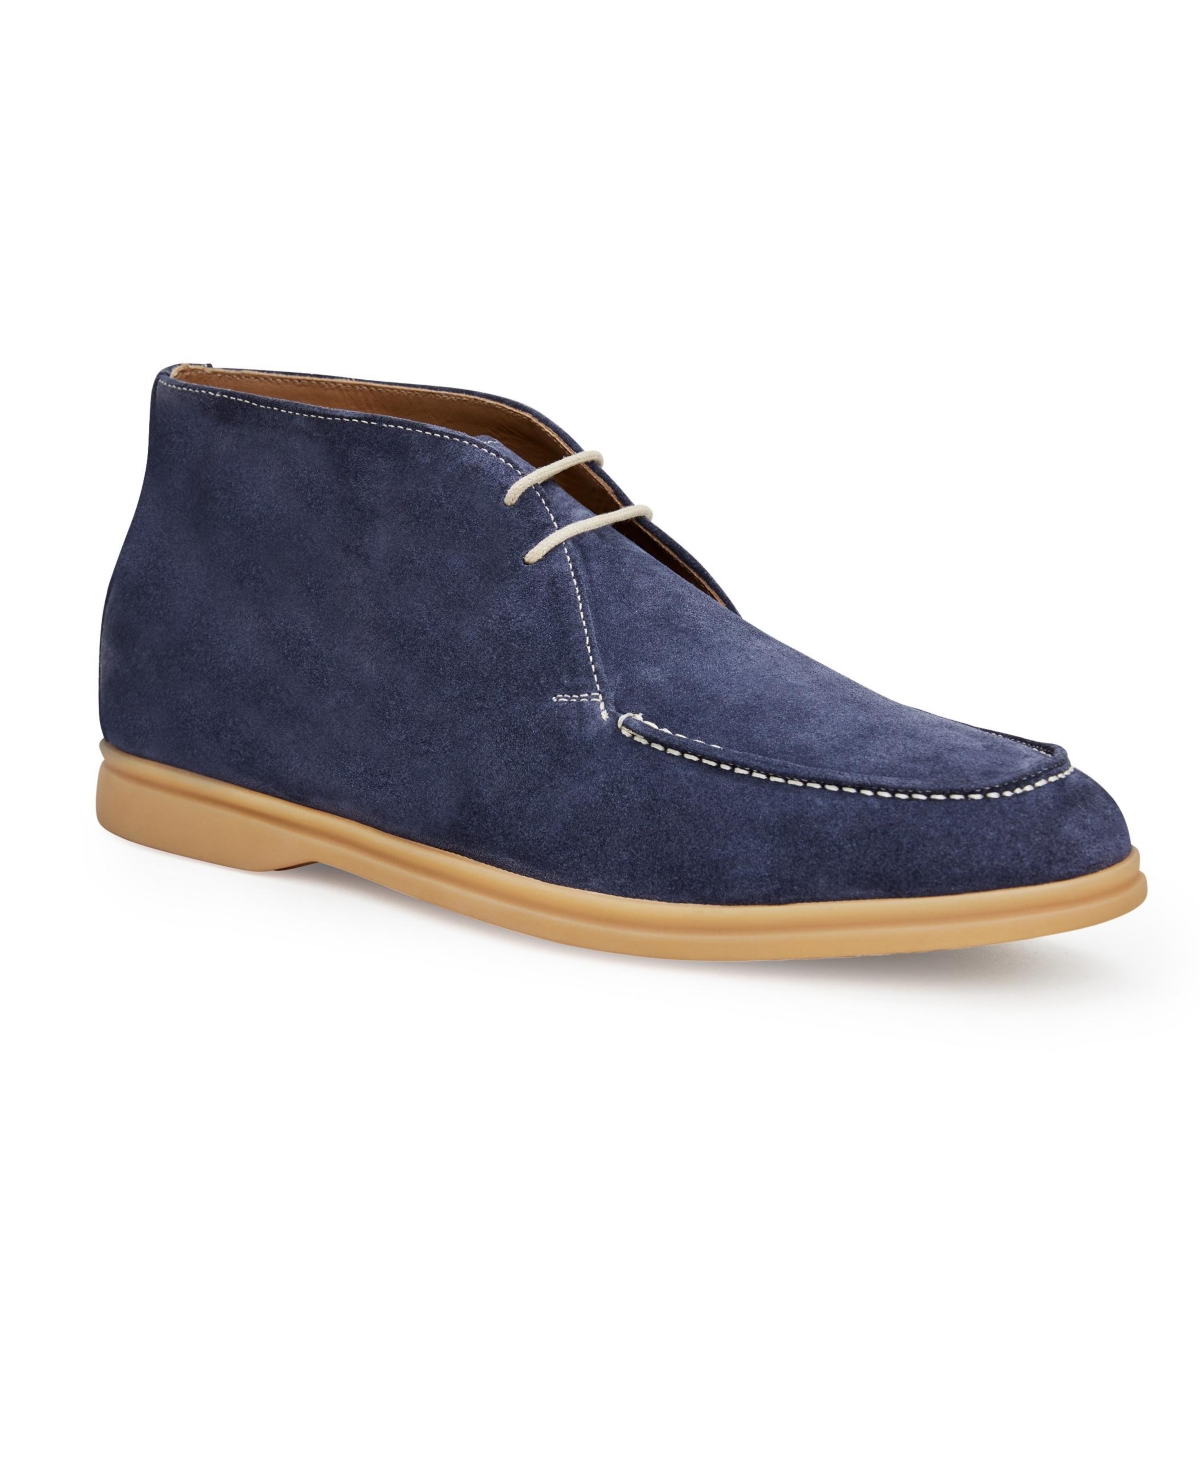 Men's Alto Chukka Lace Up Boots - Navy Suede